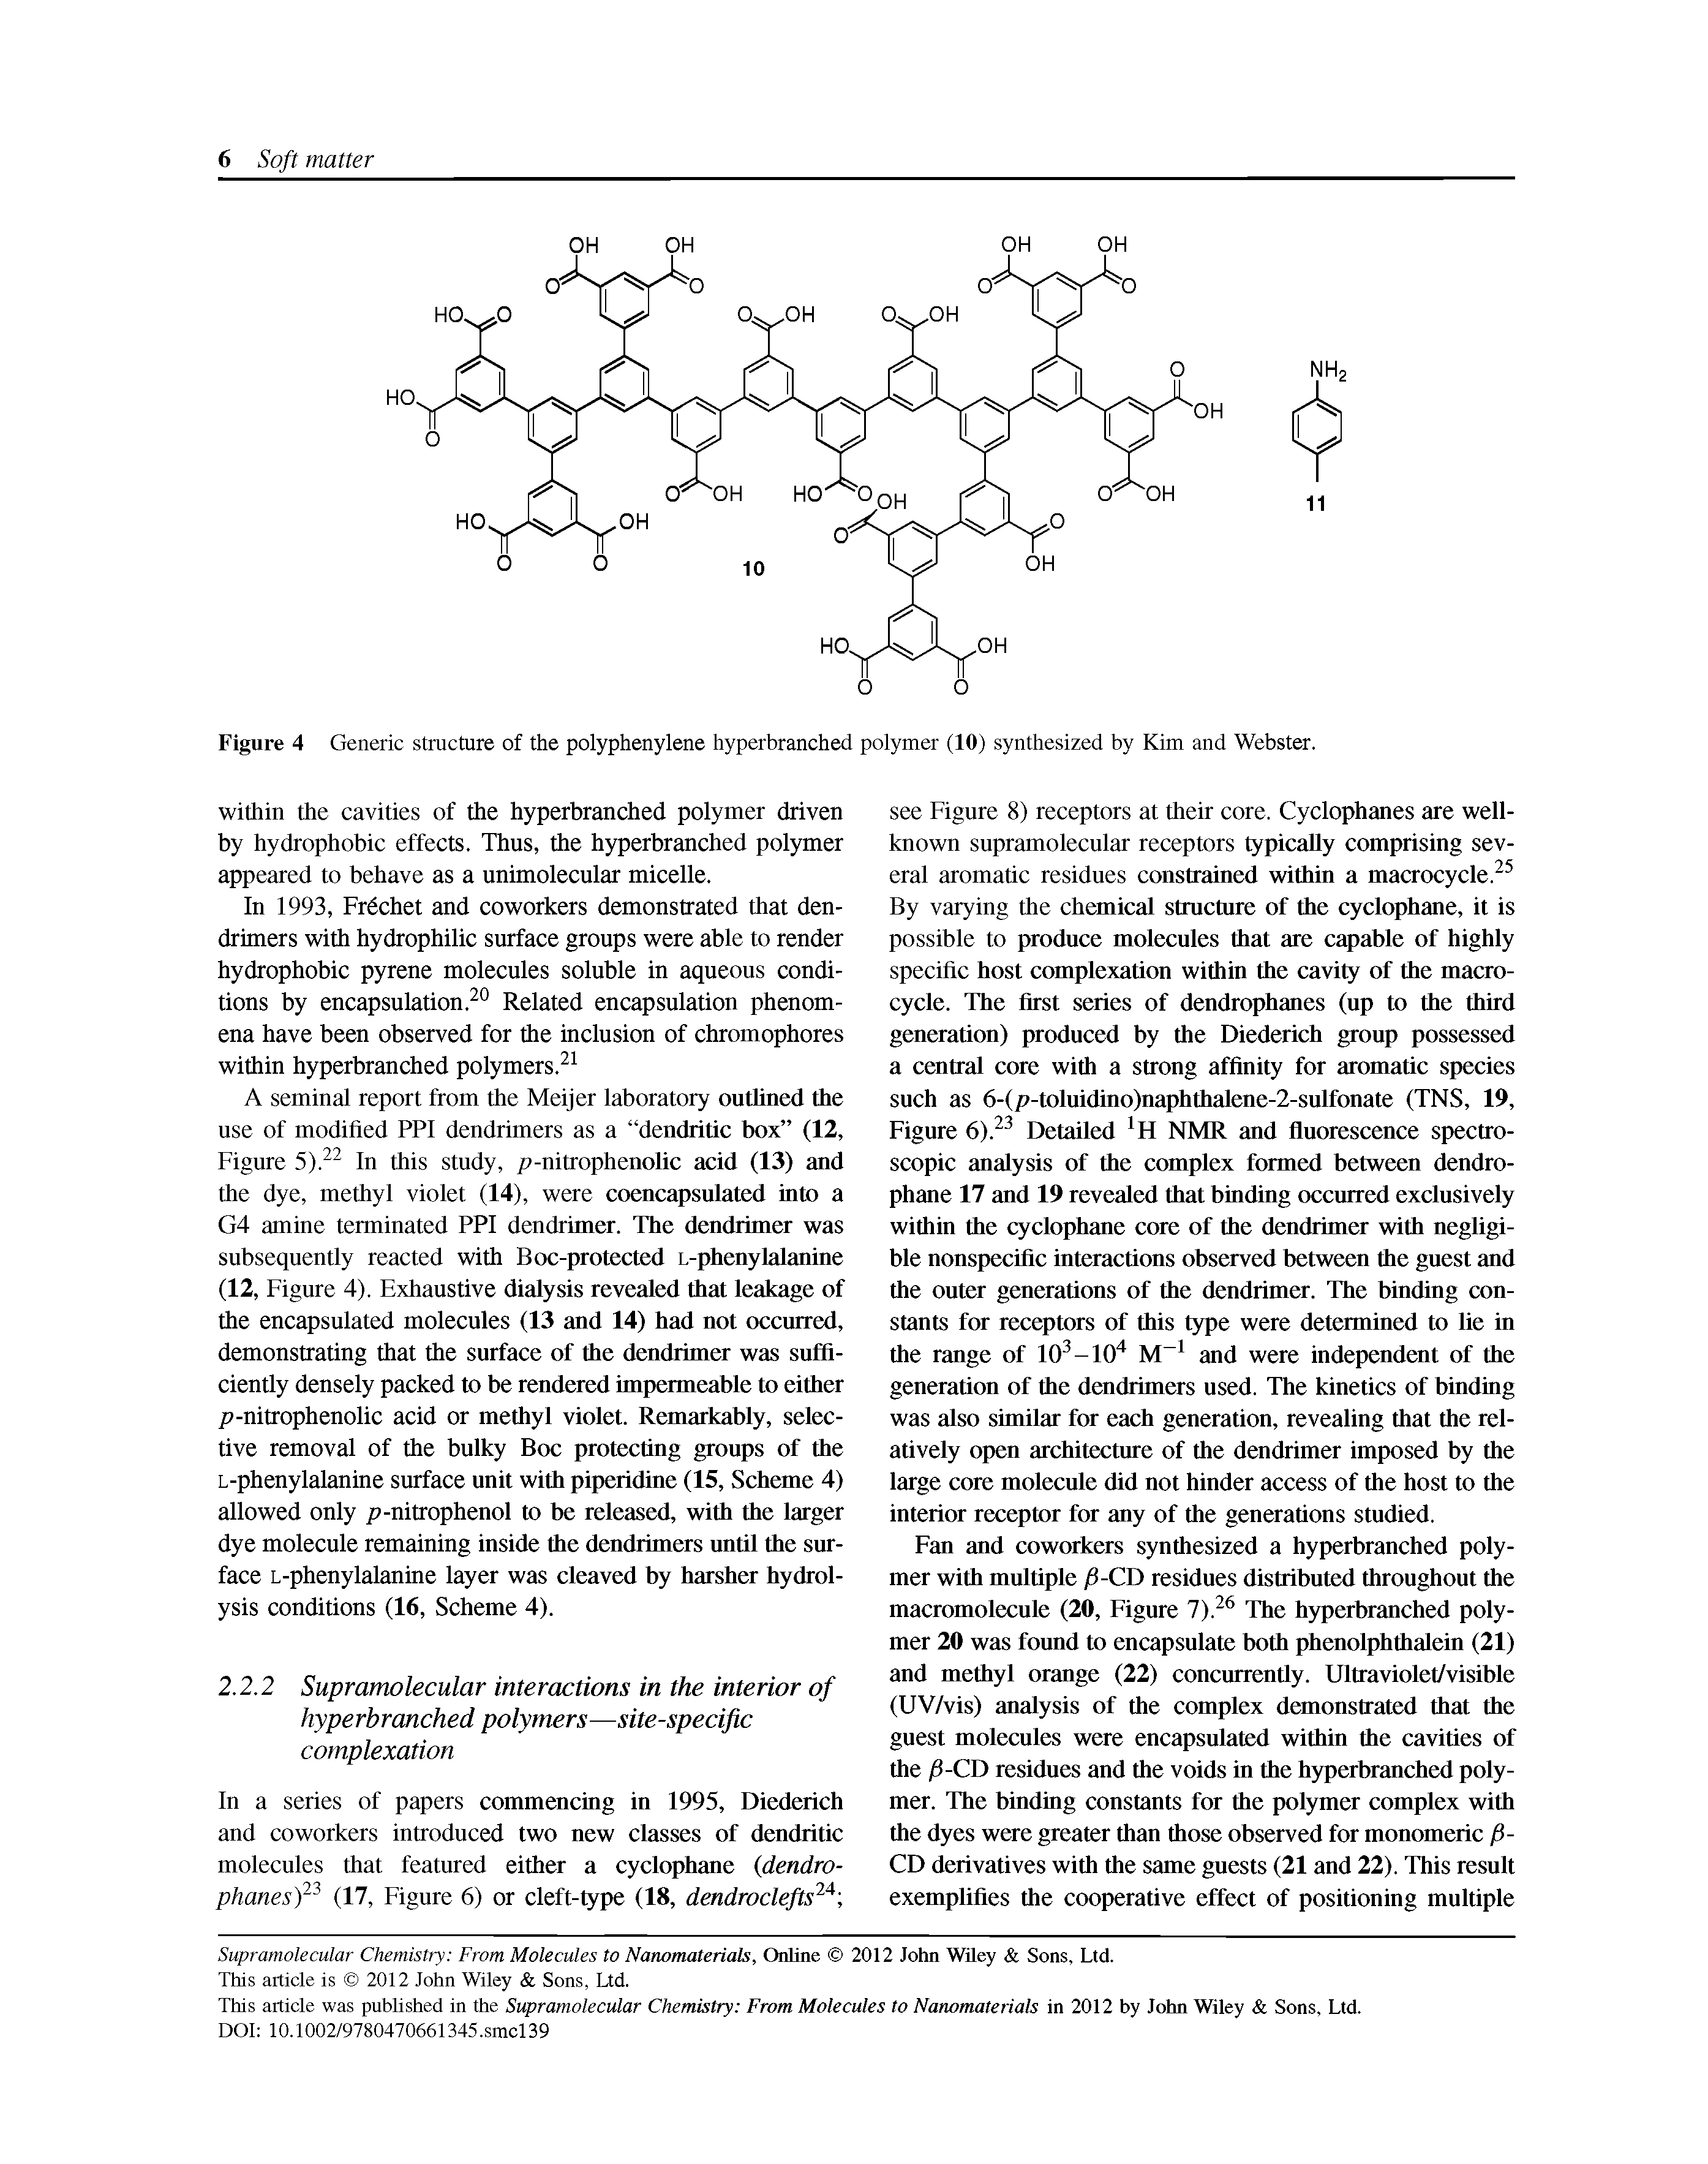 Figure 4 Generic structure of the polyphenylene hyperbranched polymer (10) synthesized by Kim and Webster.